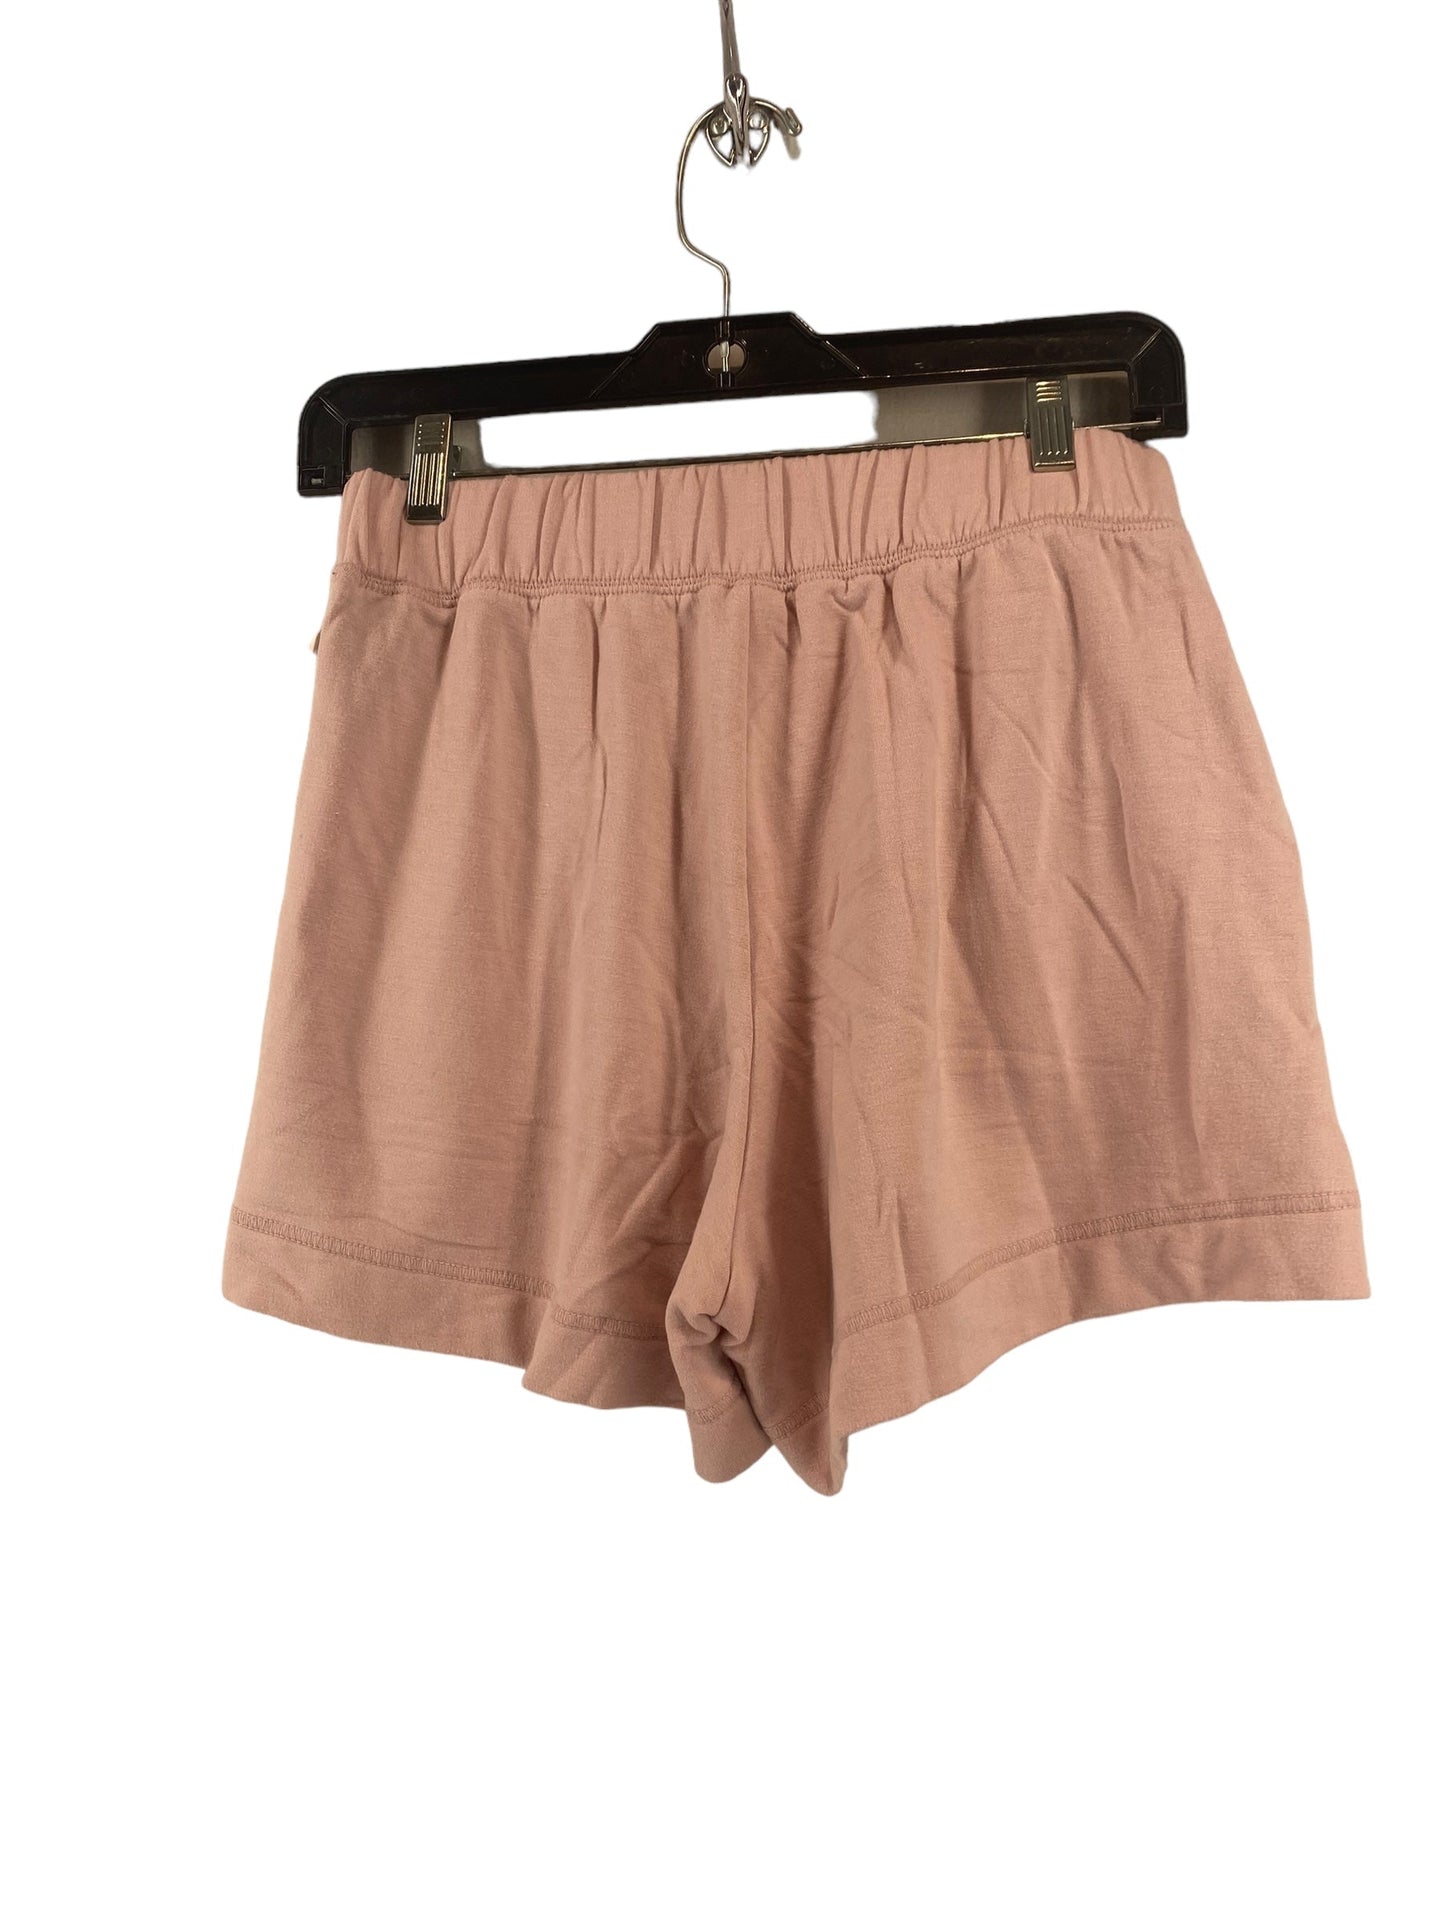 Pink Shorts Old Navy, Size Xs